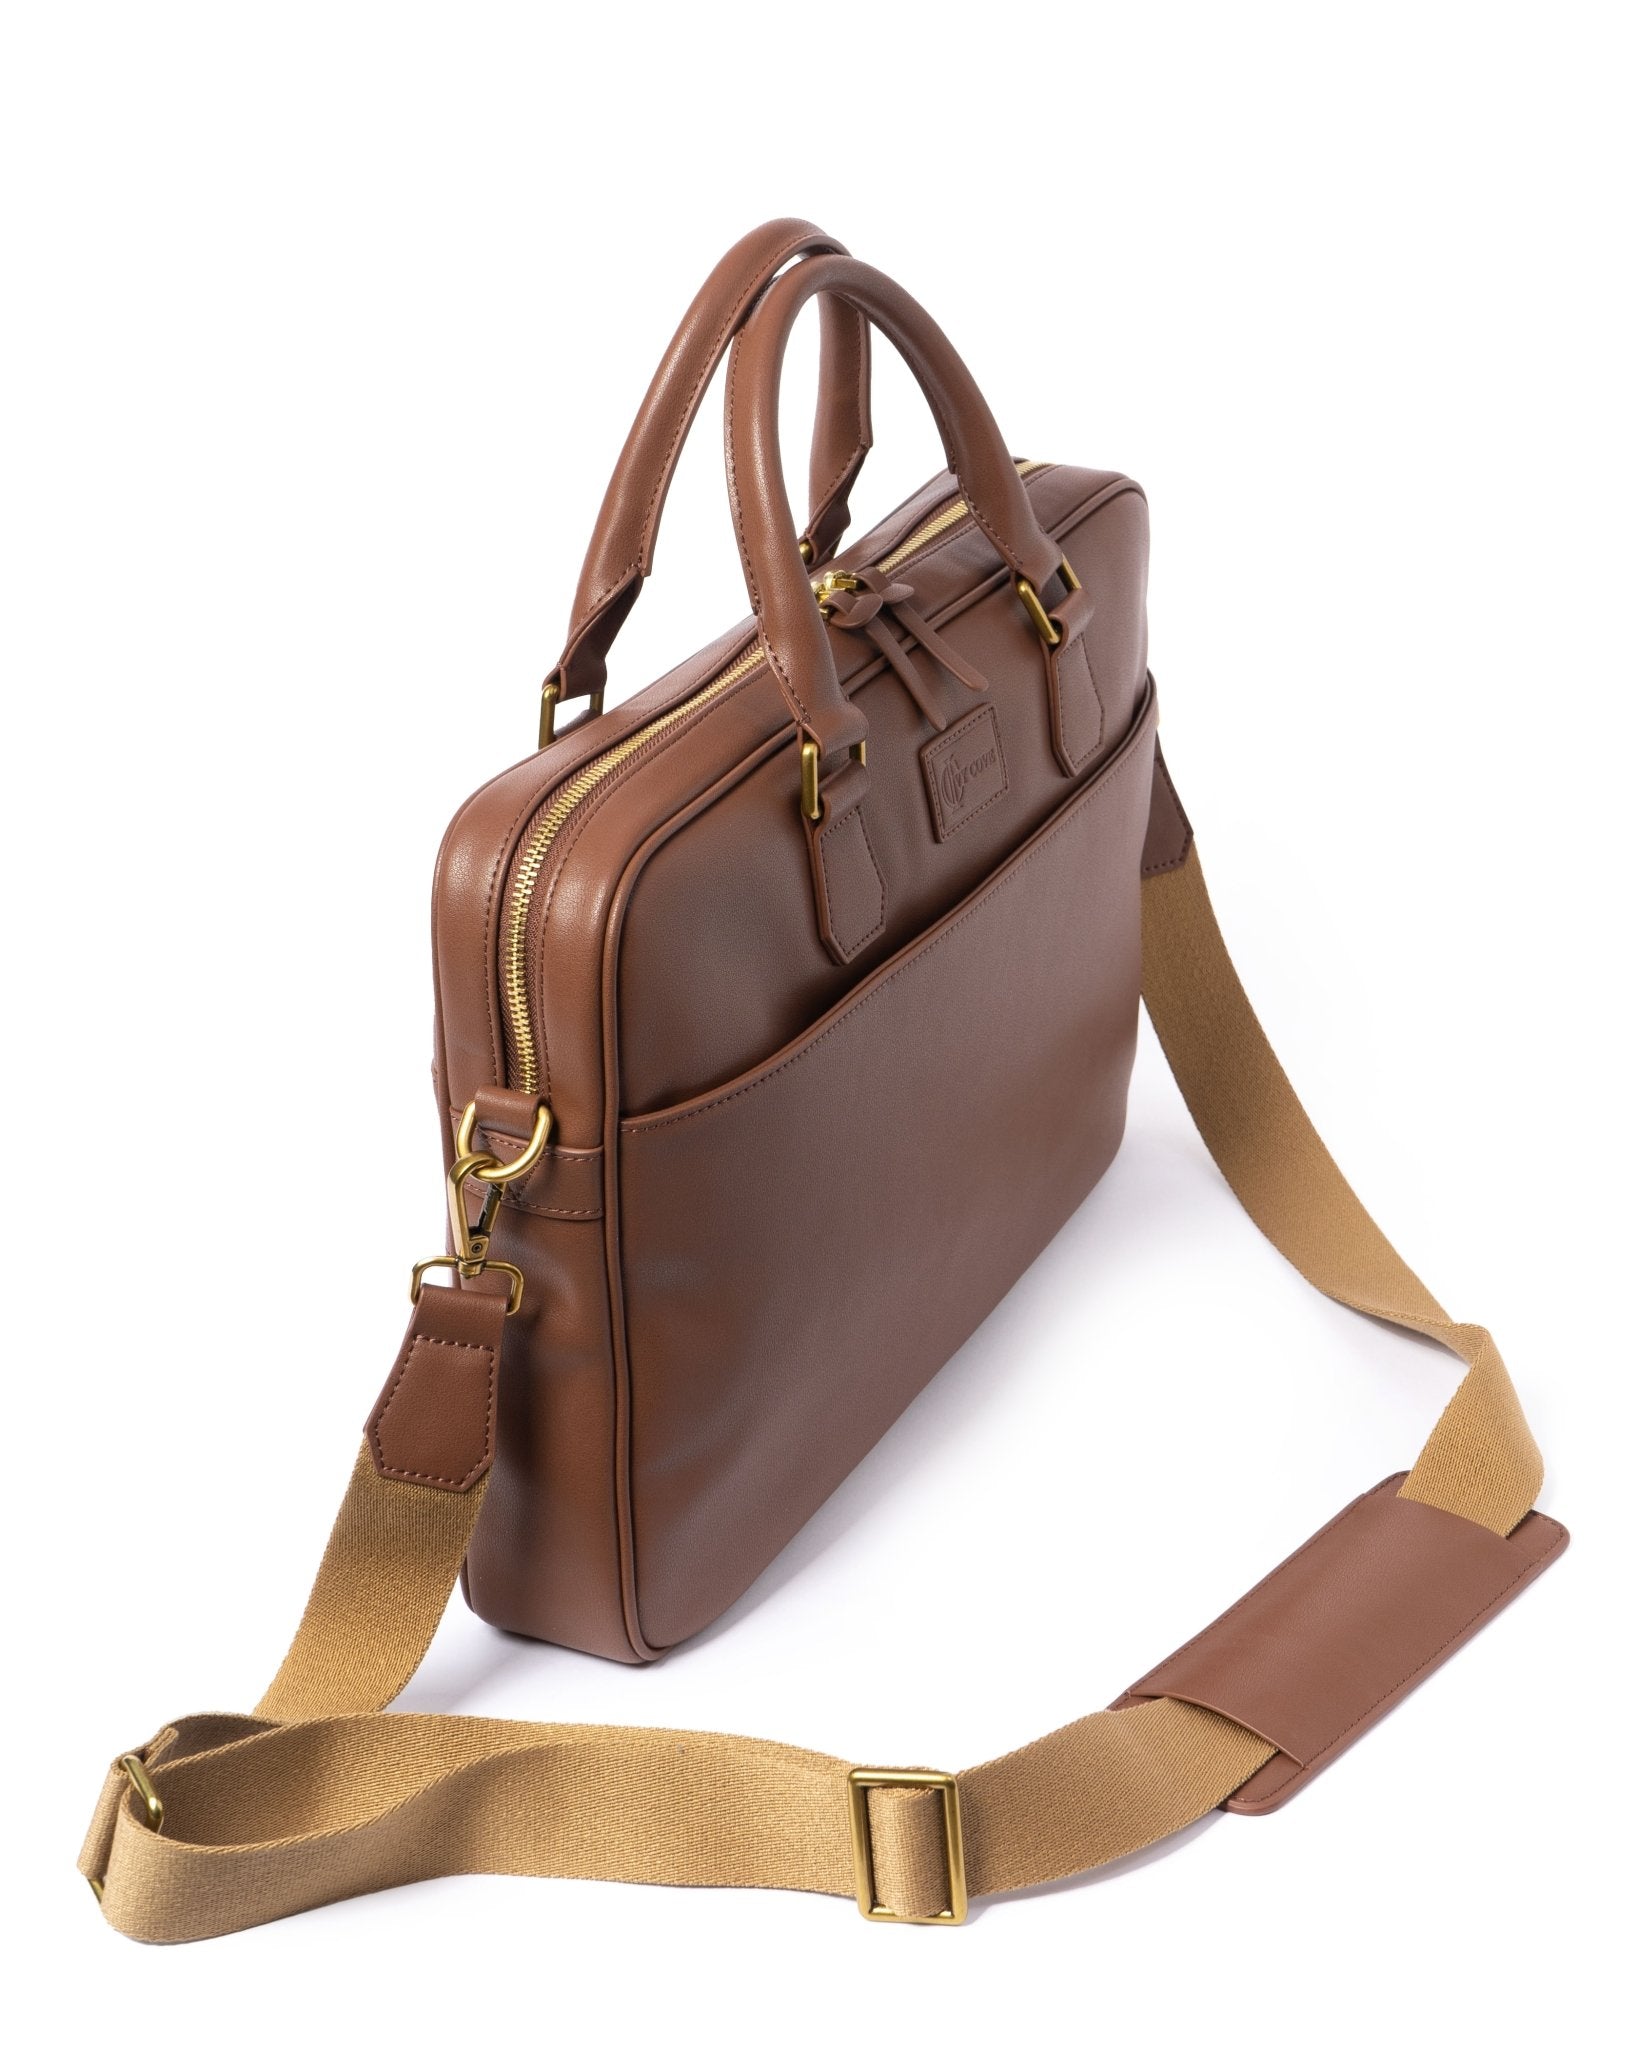 Nazca Briefcase - Recycled Leather - Ivy Cove Montecito